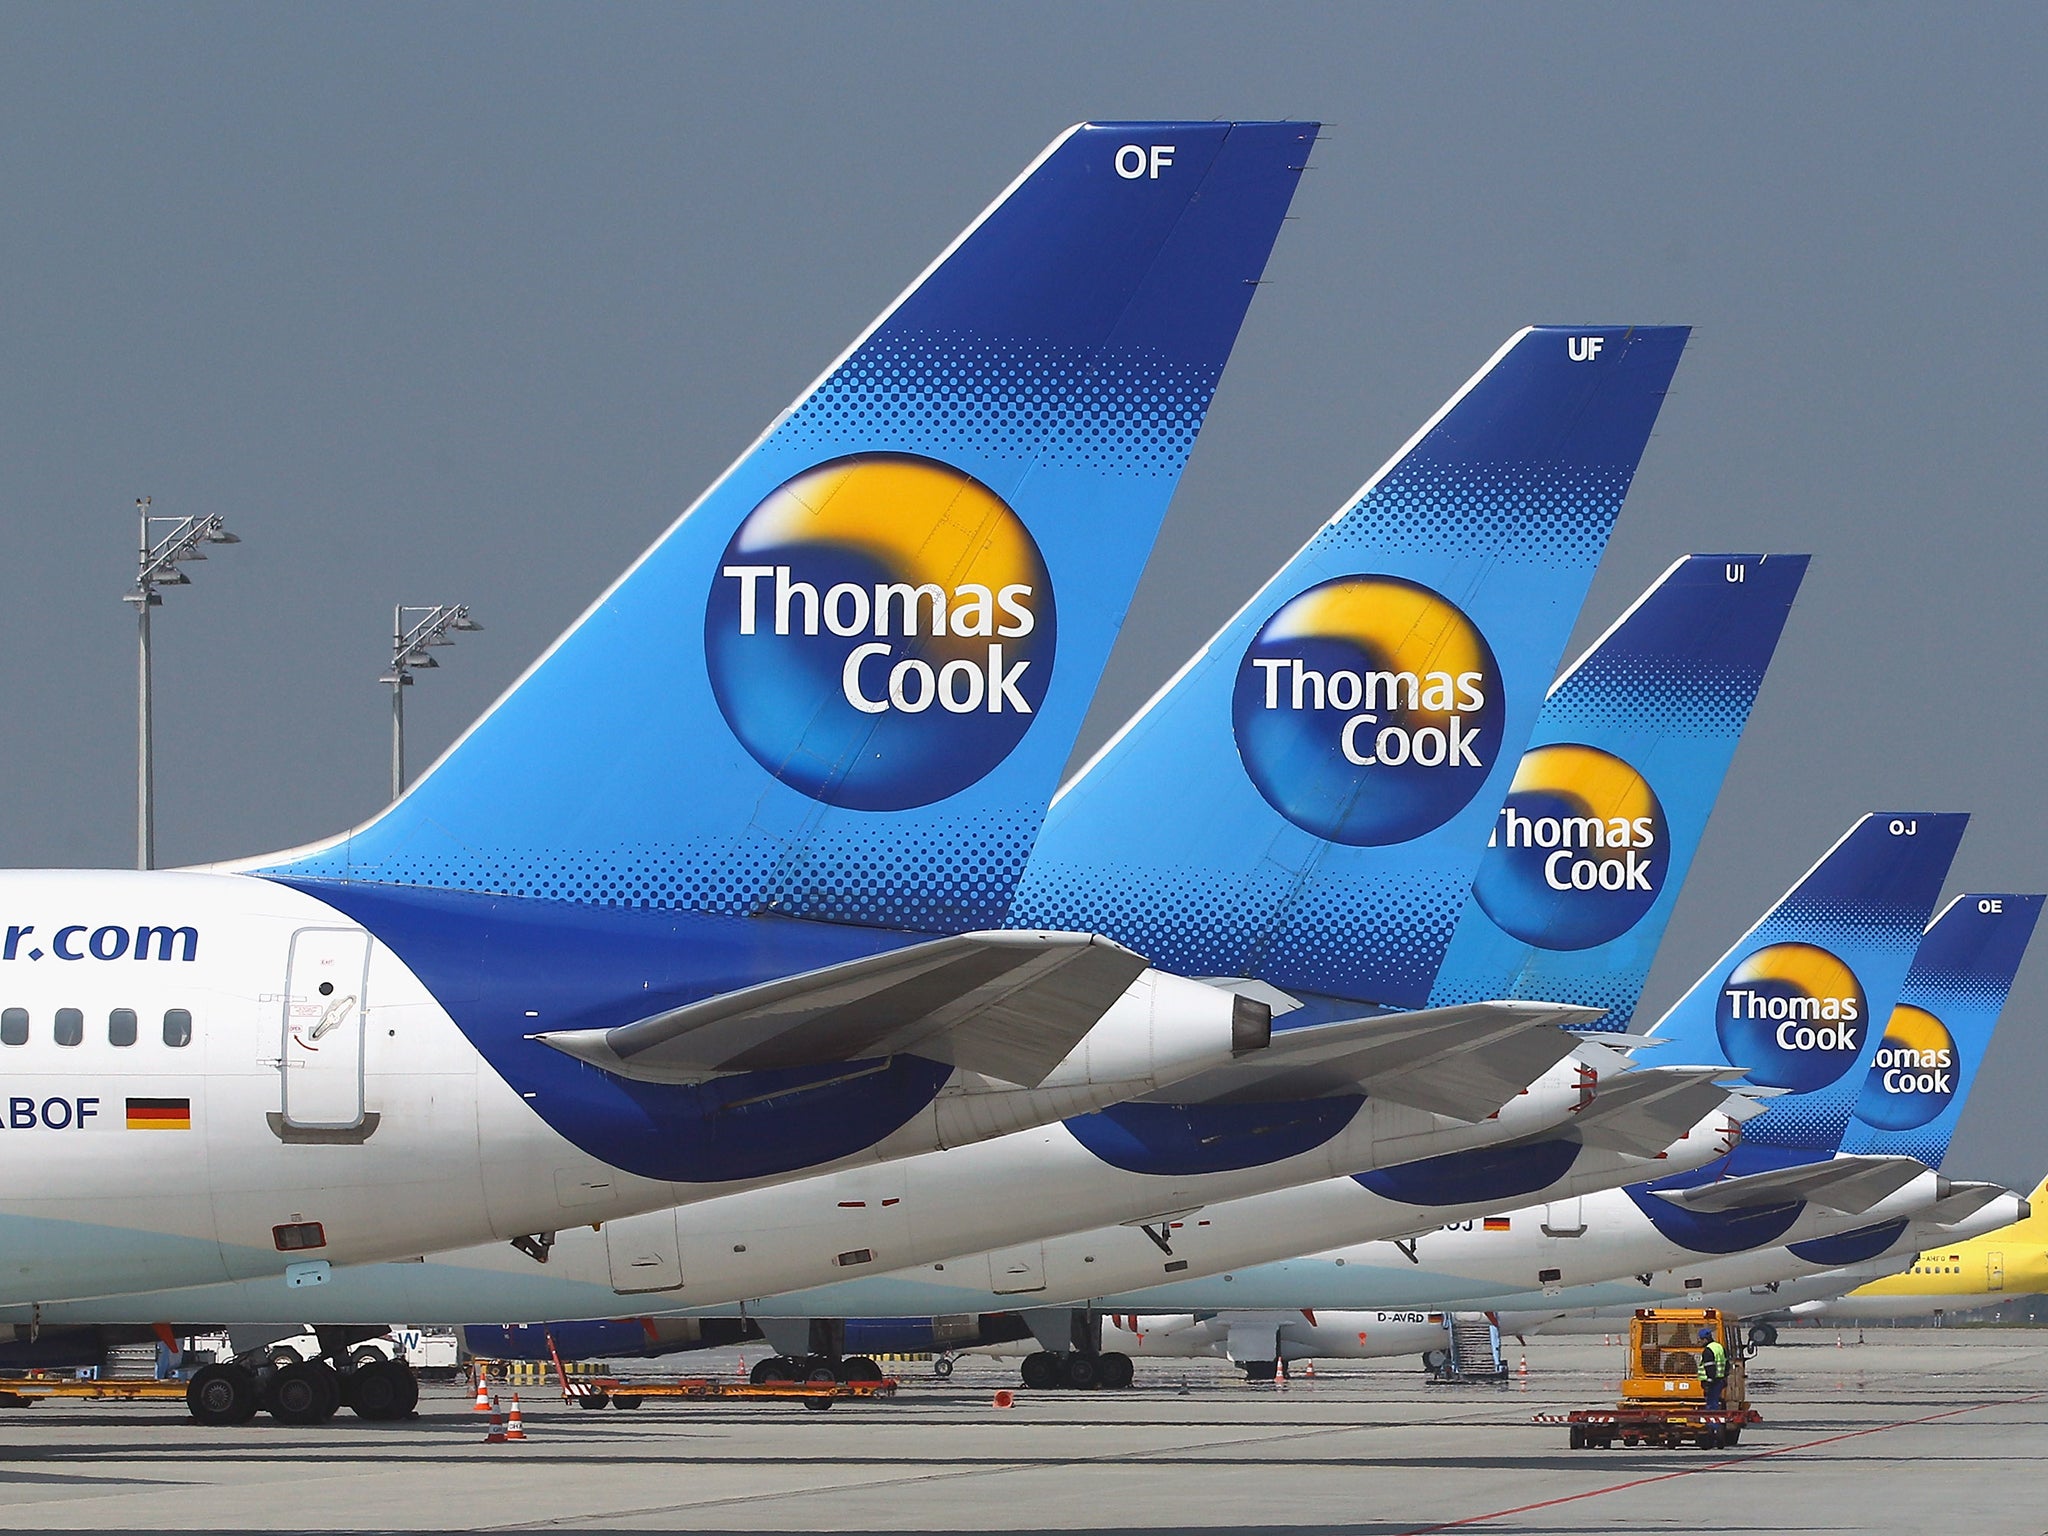 Thomas Cook went bust this week